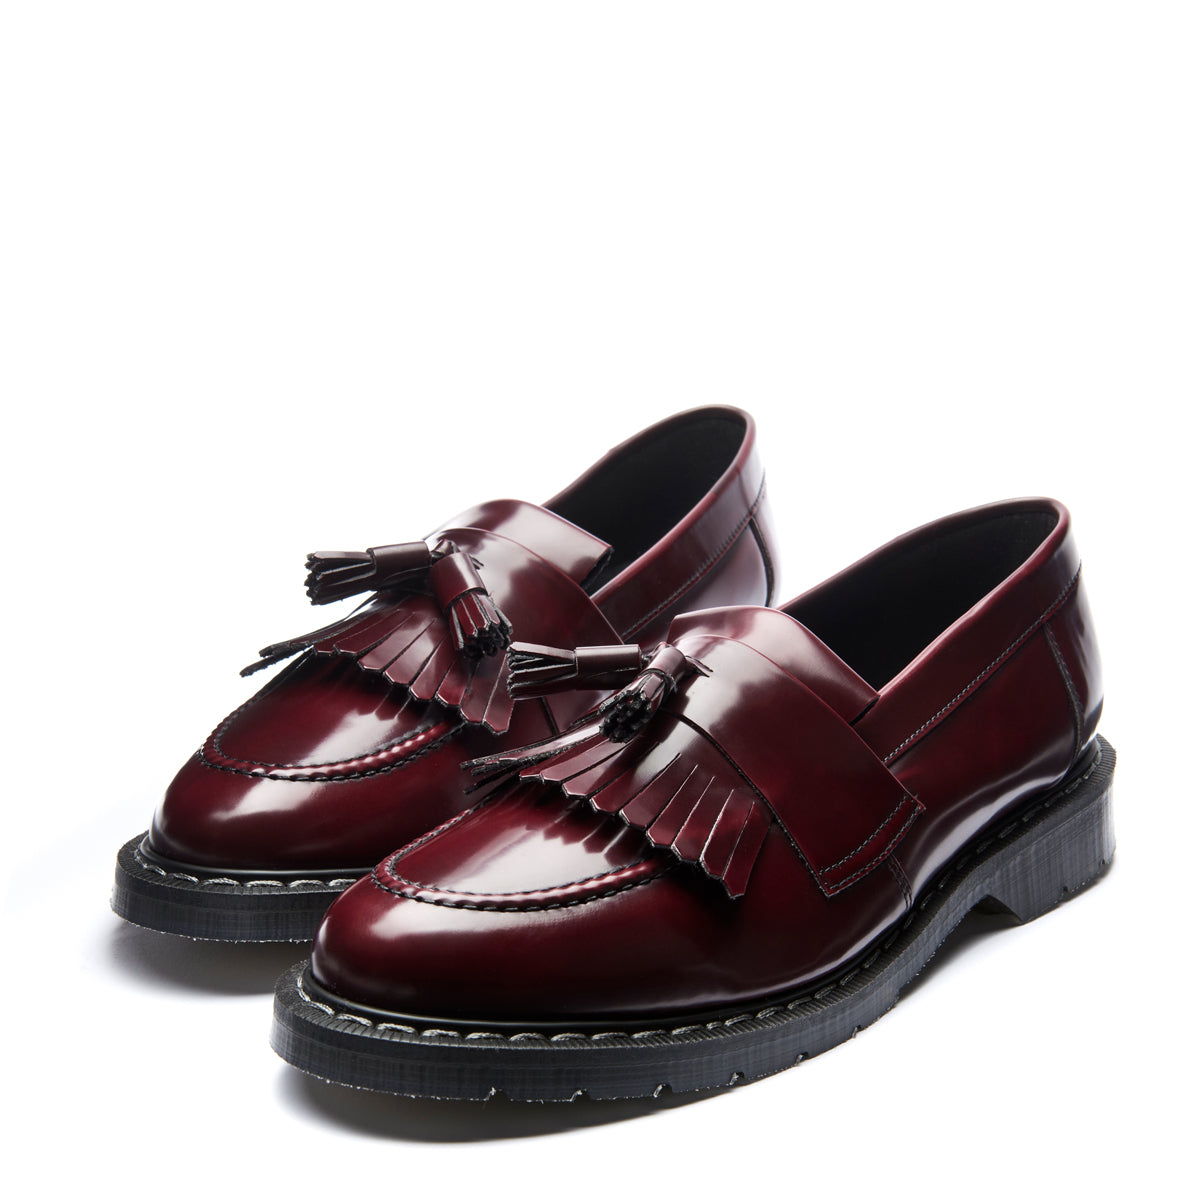 Buy Imperial Cherry Moccasin Online 10